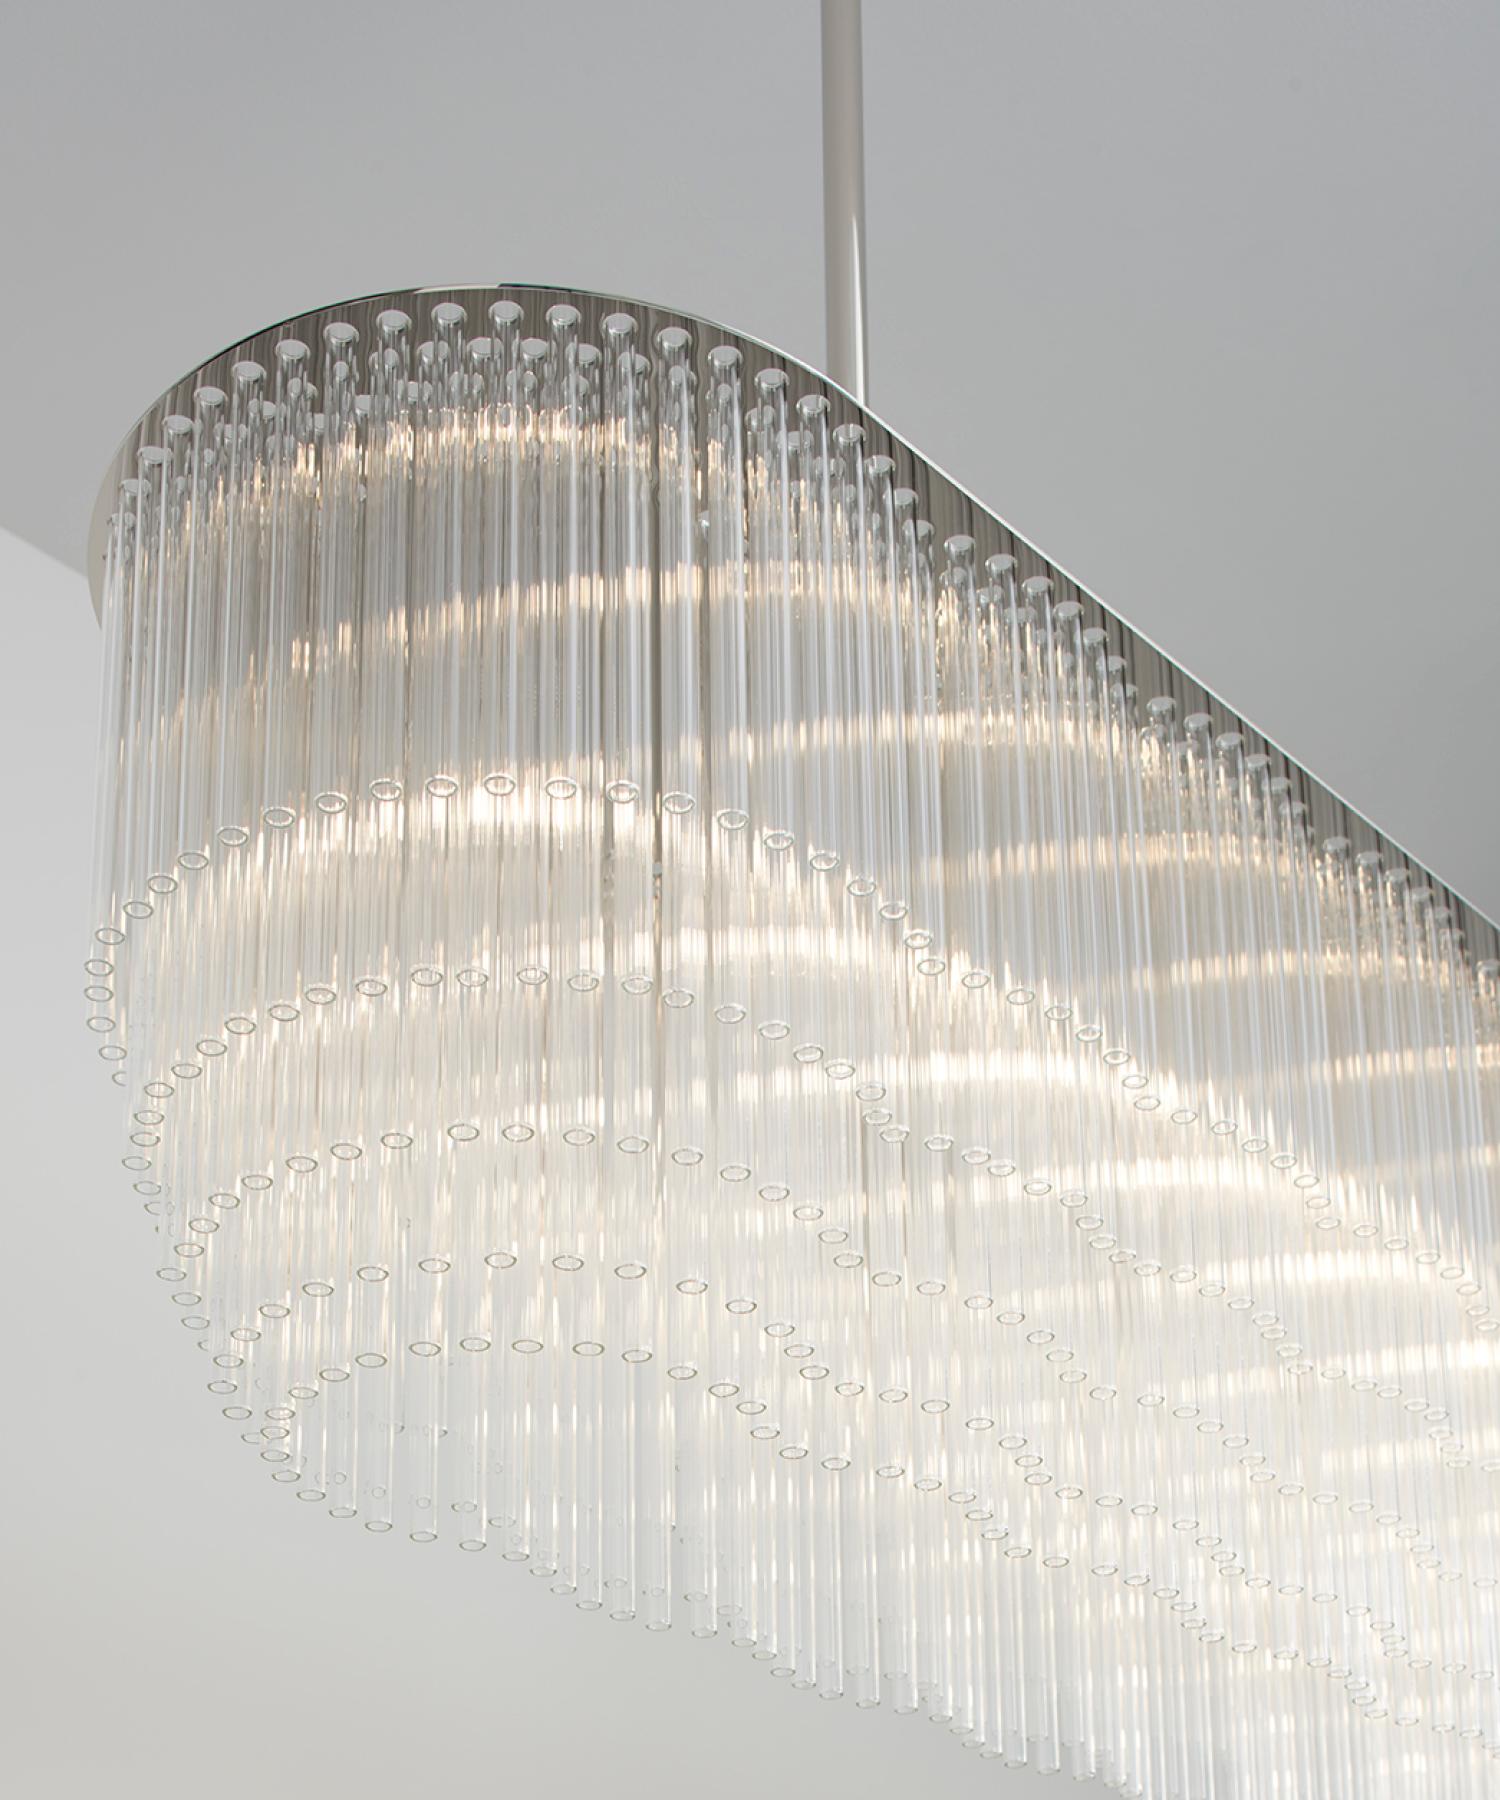 Plated Linear Chandelier 1479mm / 58.25